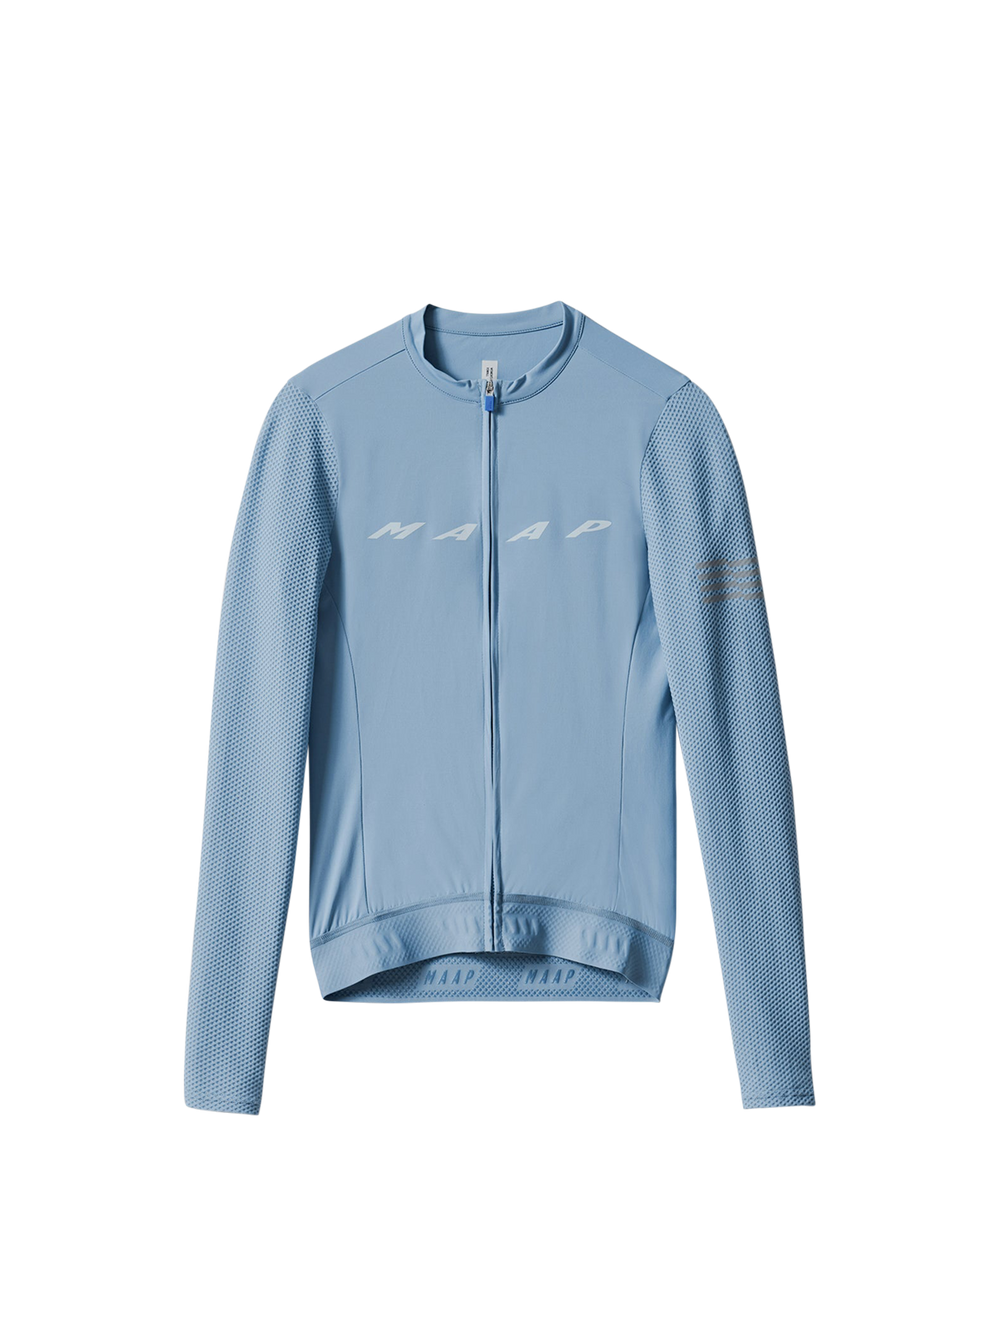 Product Image for Women's Evade Pro Base LS Jersey